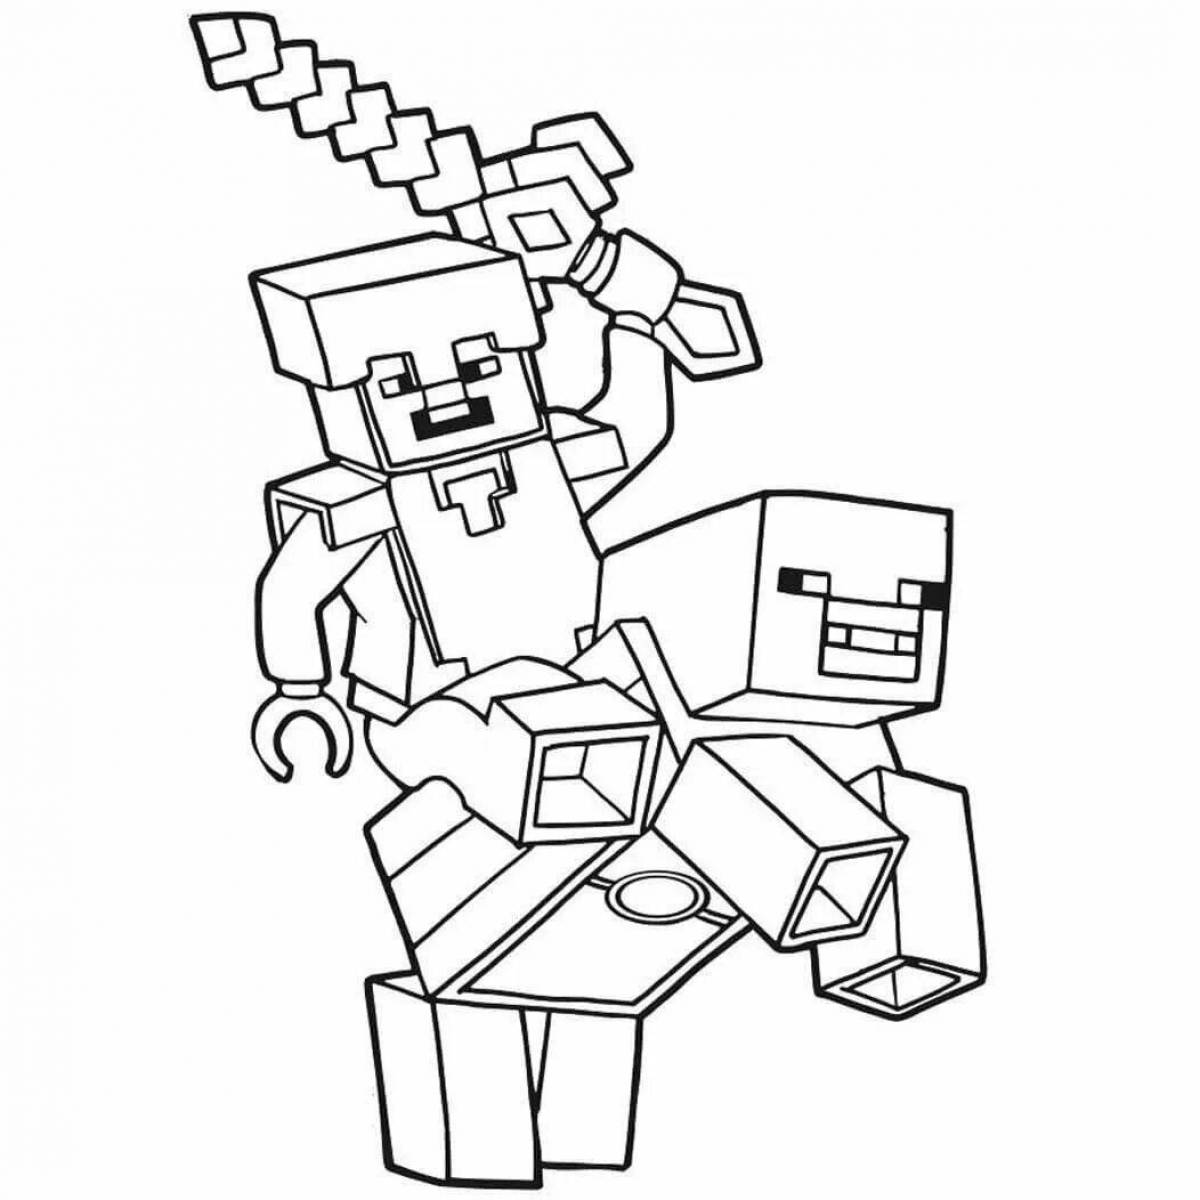 Coloring minecraft colorful stickers